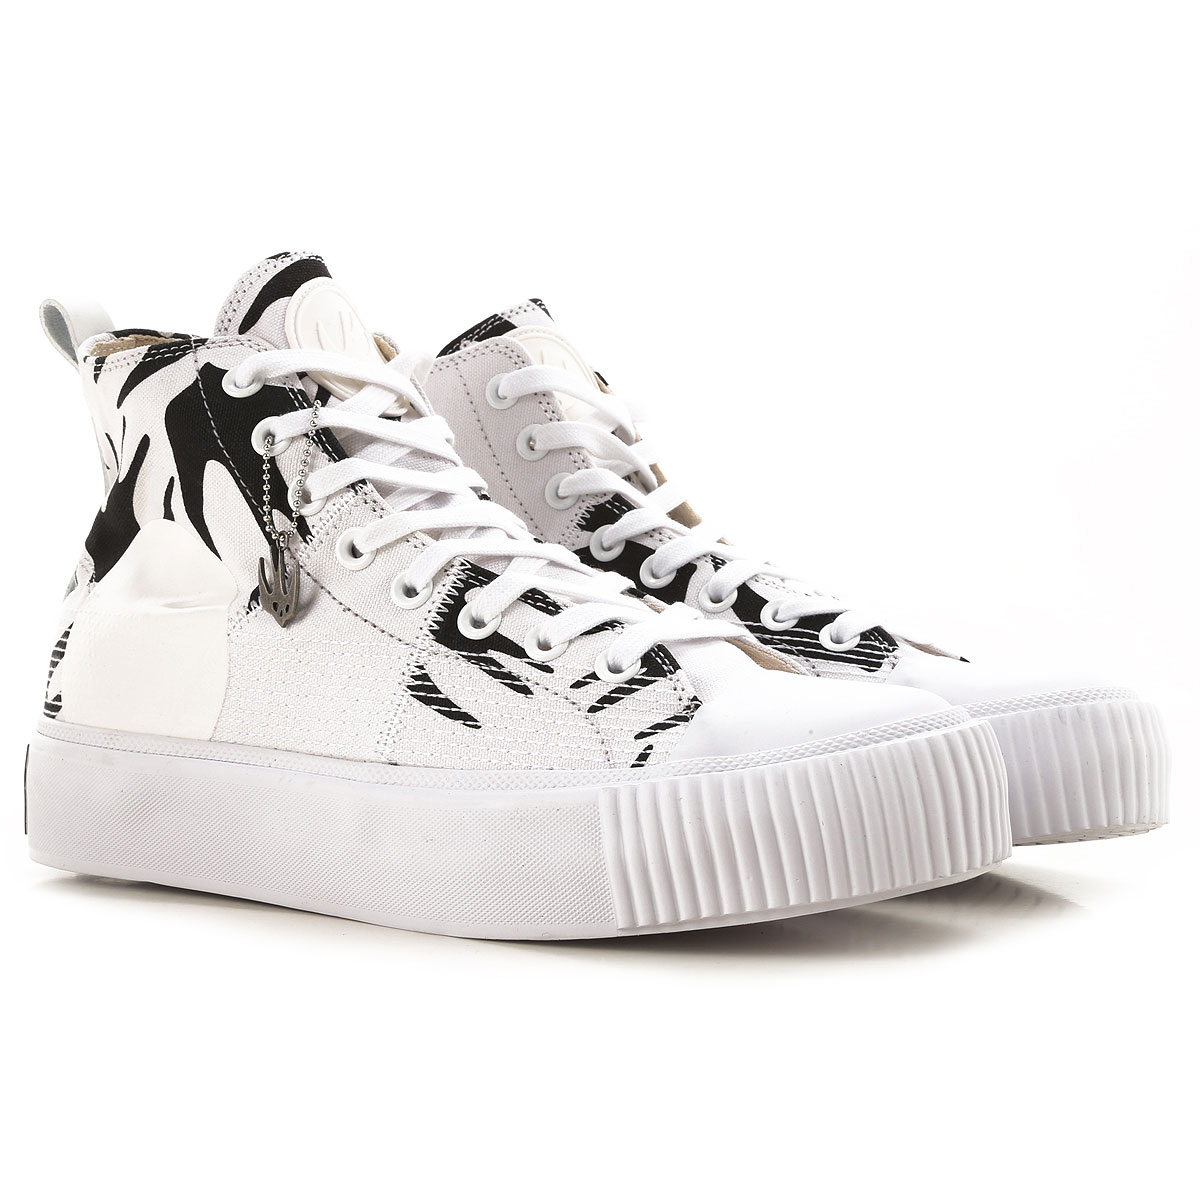 Mens Shoes Alexander McQueen McQ, Style code: 543772-r2608-9024